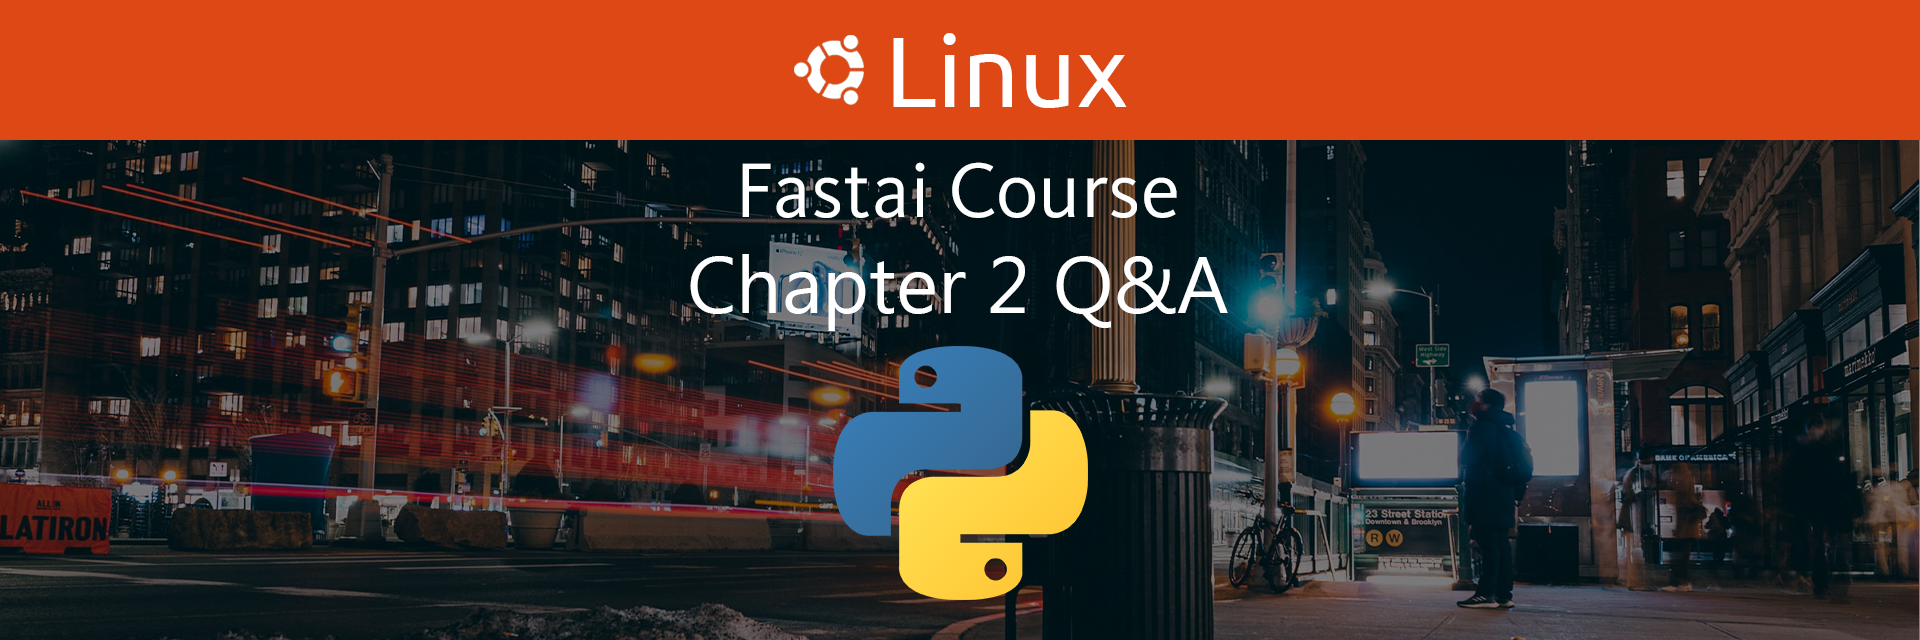 Fastai Course Chapter 2 Q&A on Linux